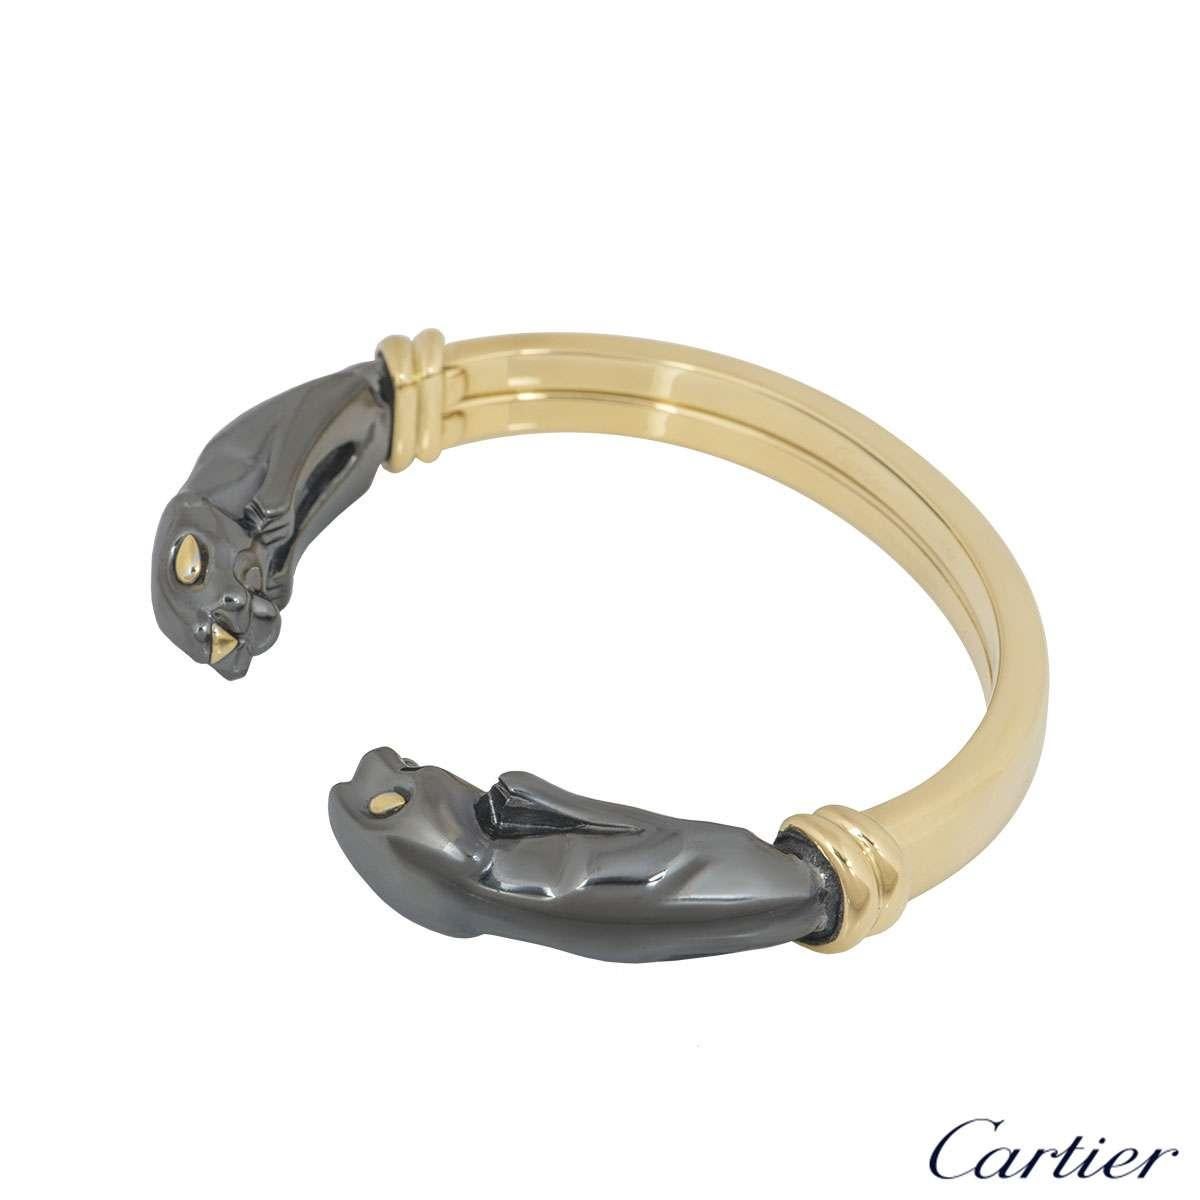 Uncut Cartier Yellow Gold and Hematite Panthere Cuff Bracelet